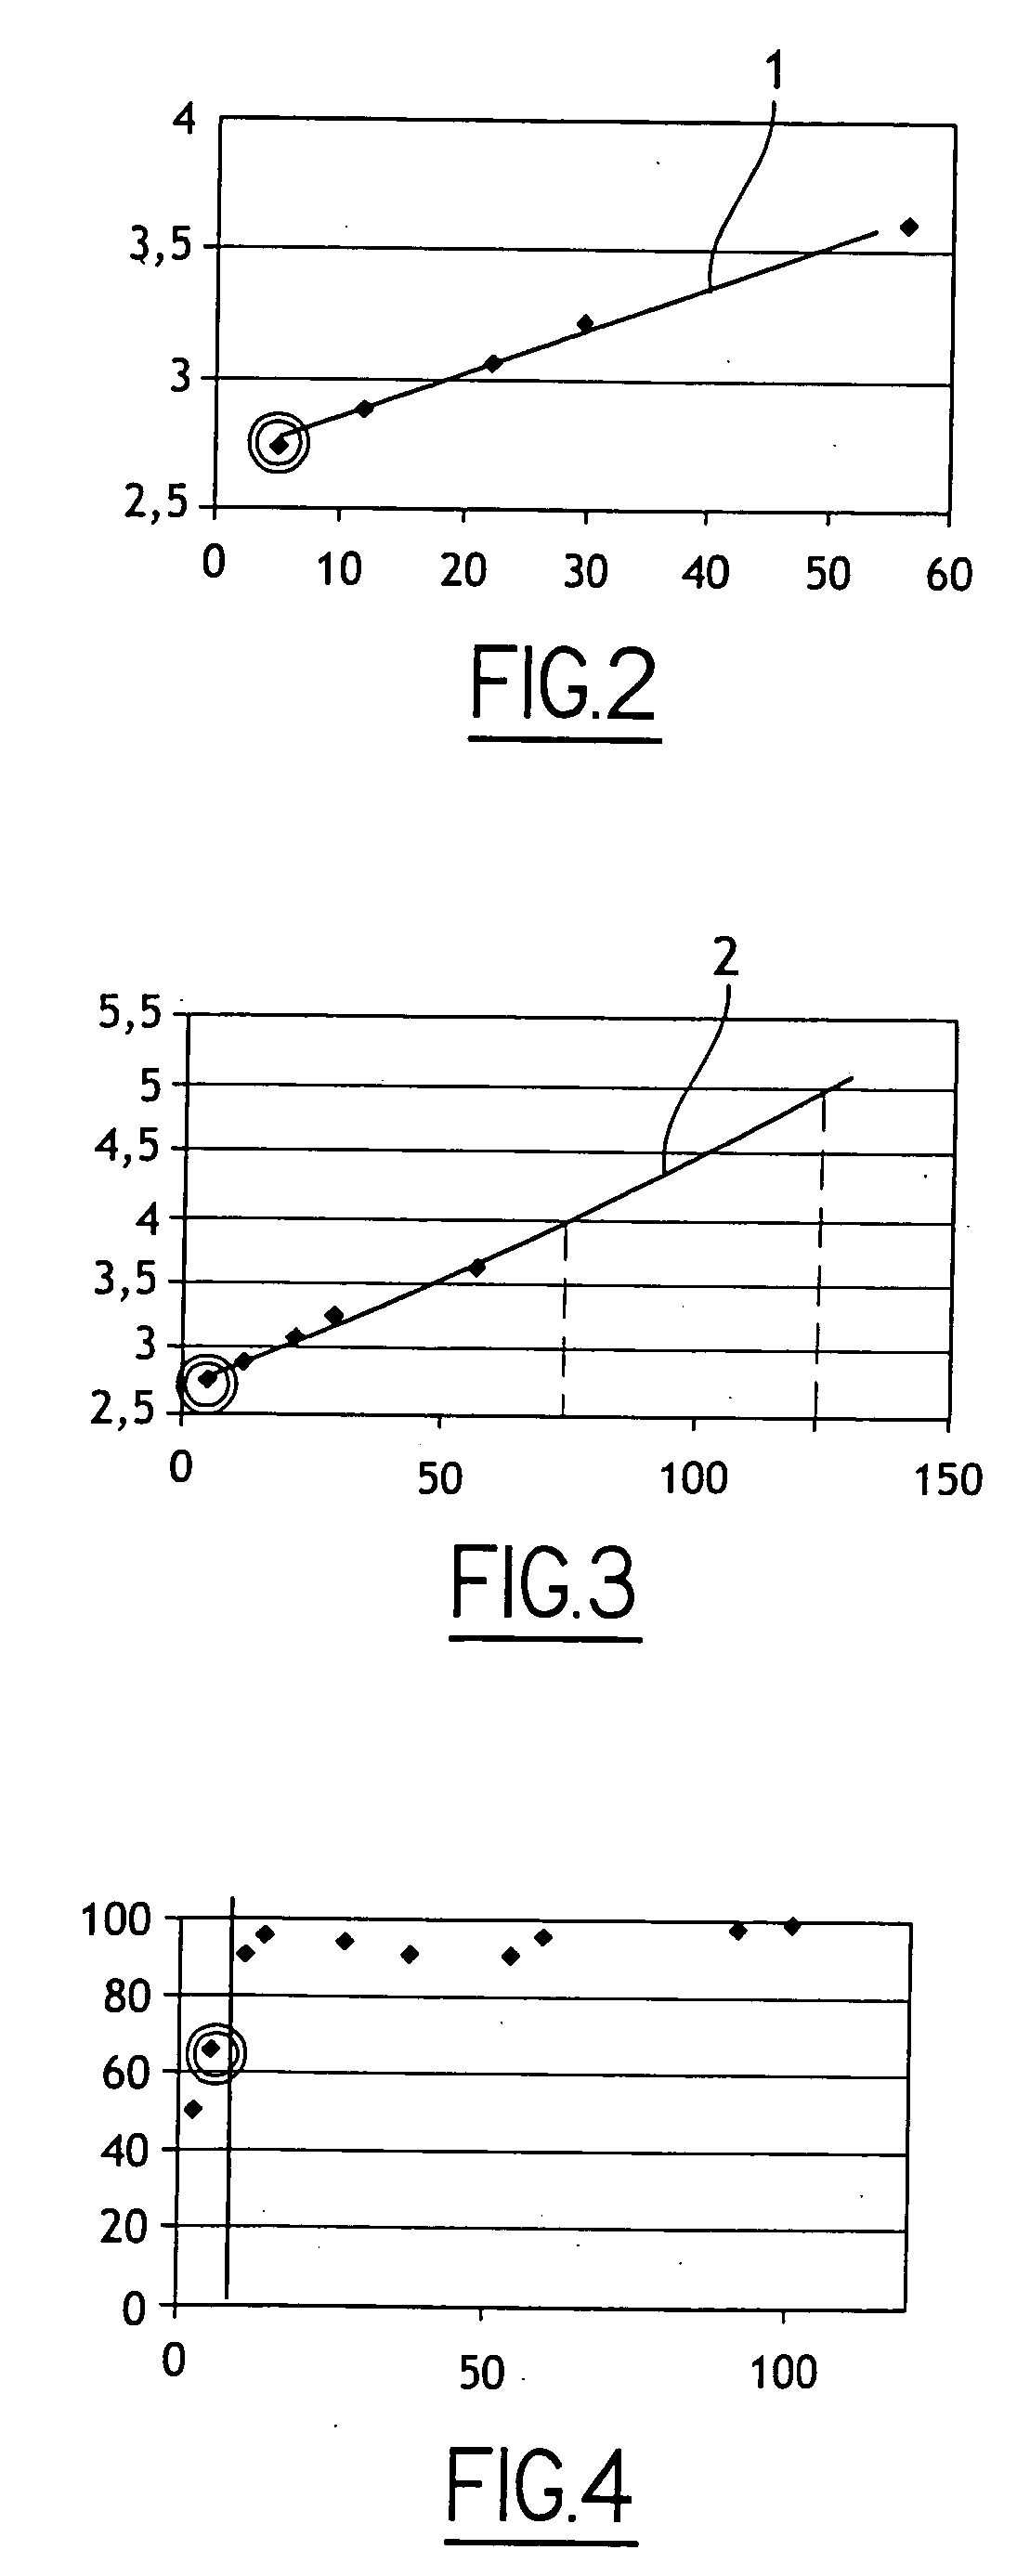 Methods for preparing a bonding surface of a semiconductor wafer